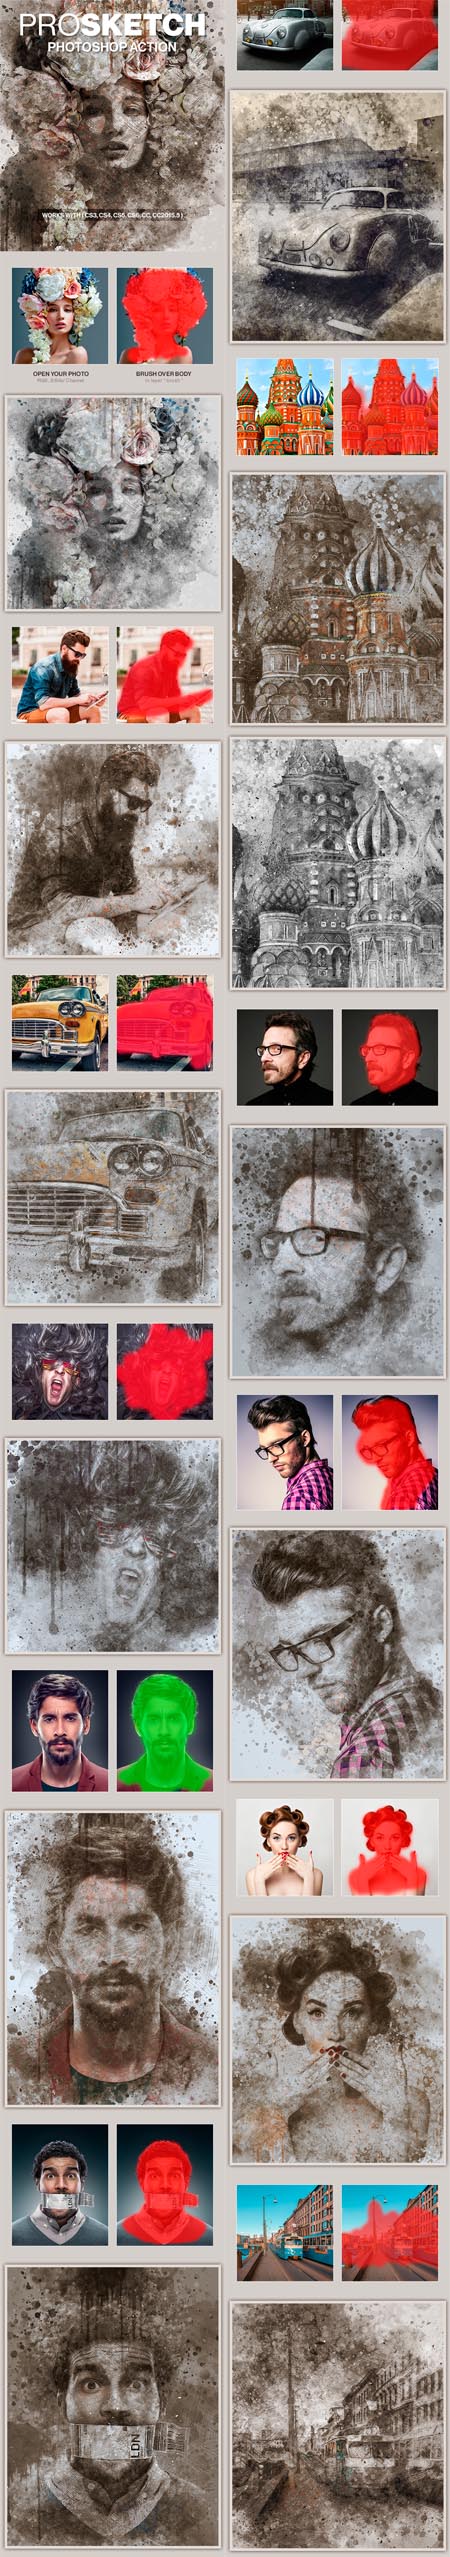 GraphicRiver - Pro Sketch - Painting Photoshop Action 18248544